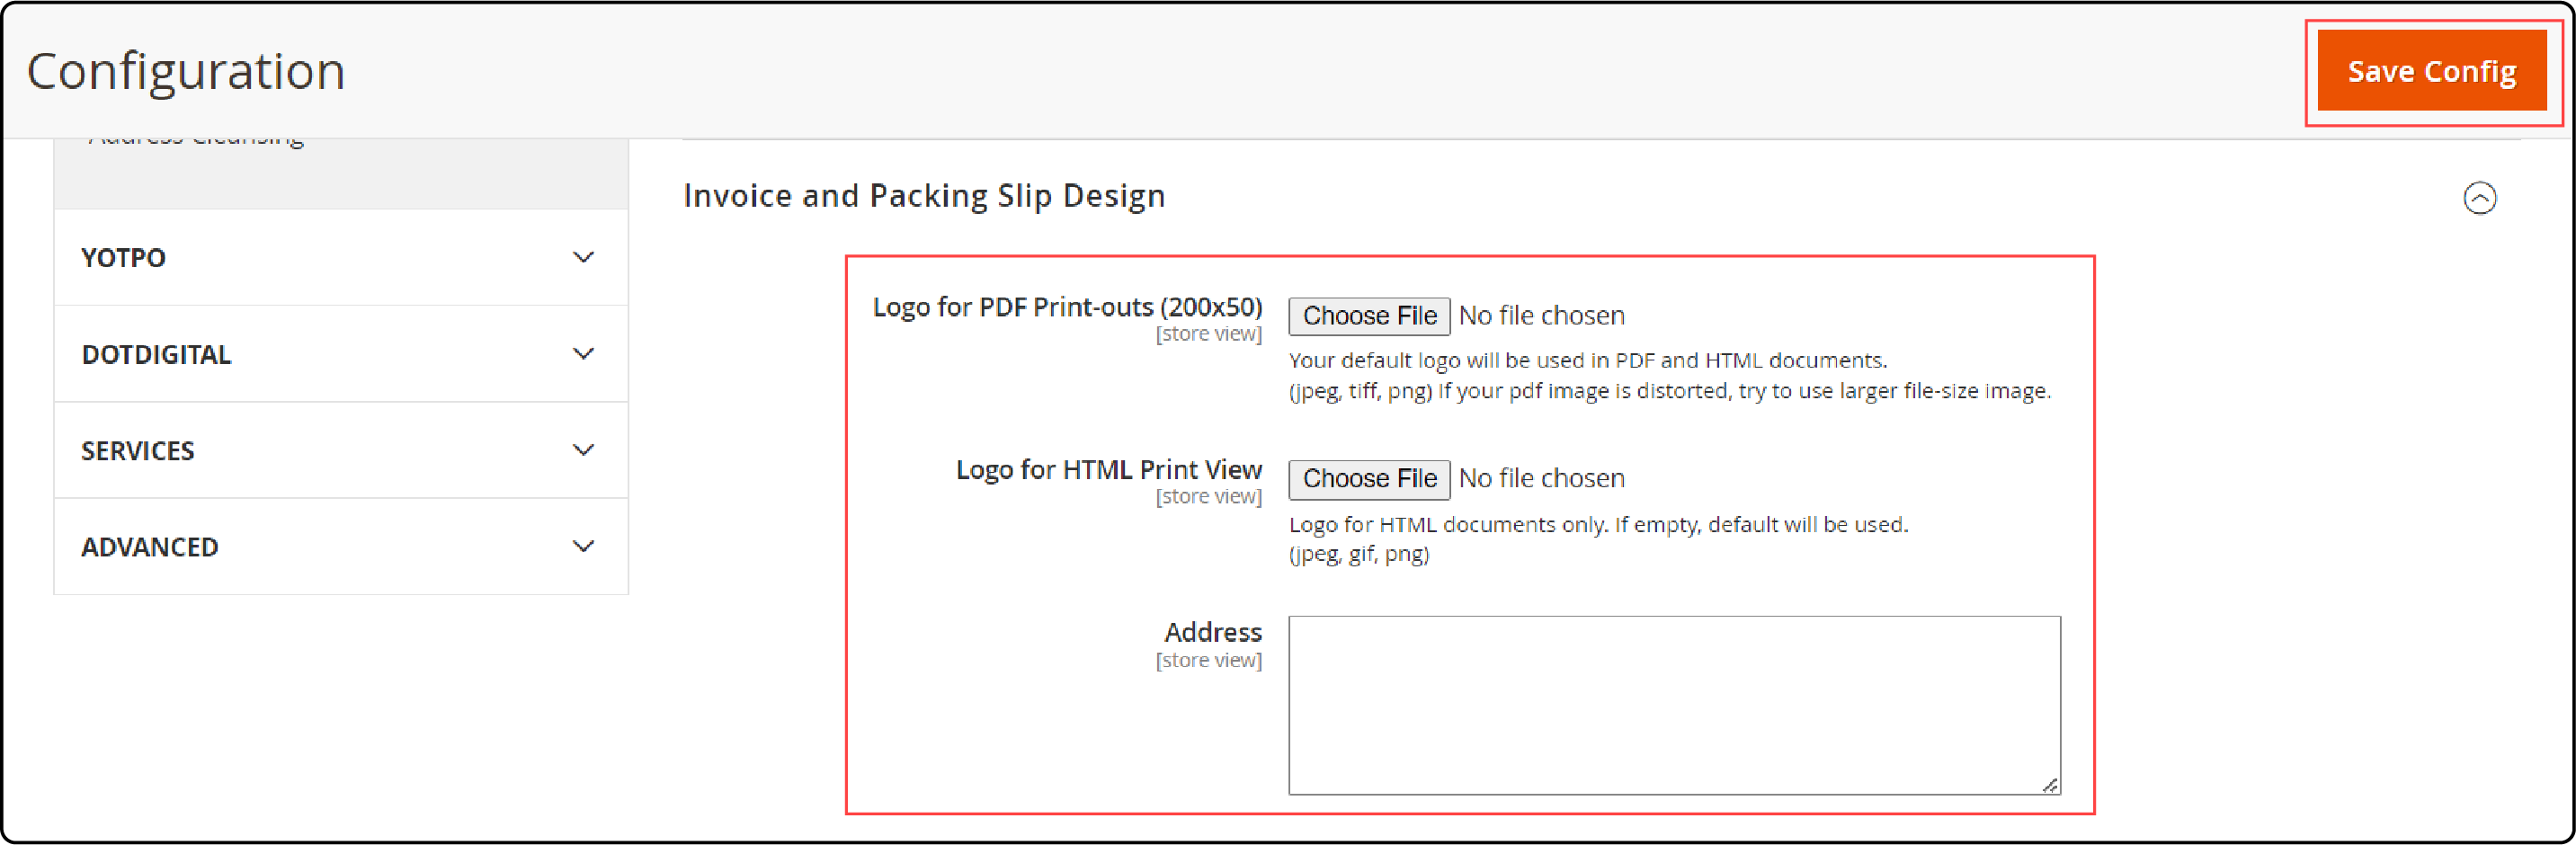 Updating PDF and HTML logos and setting display address in Magento 2